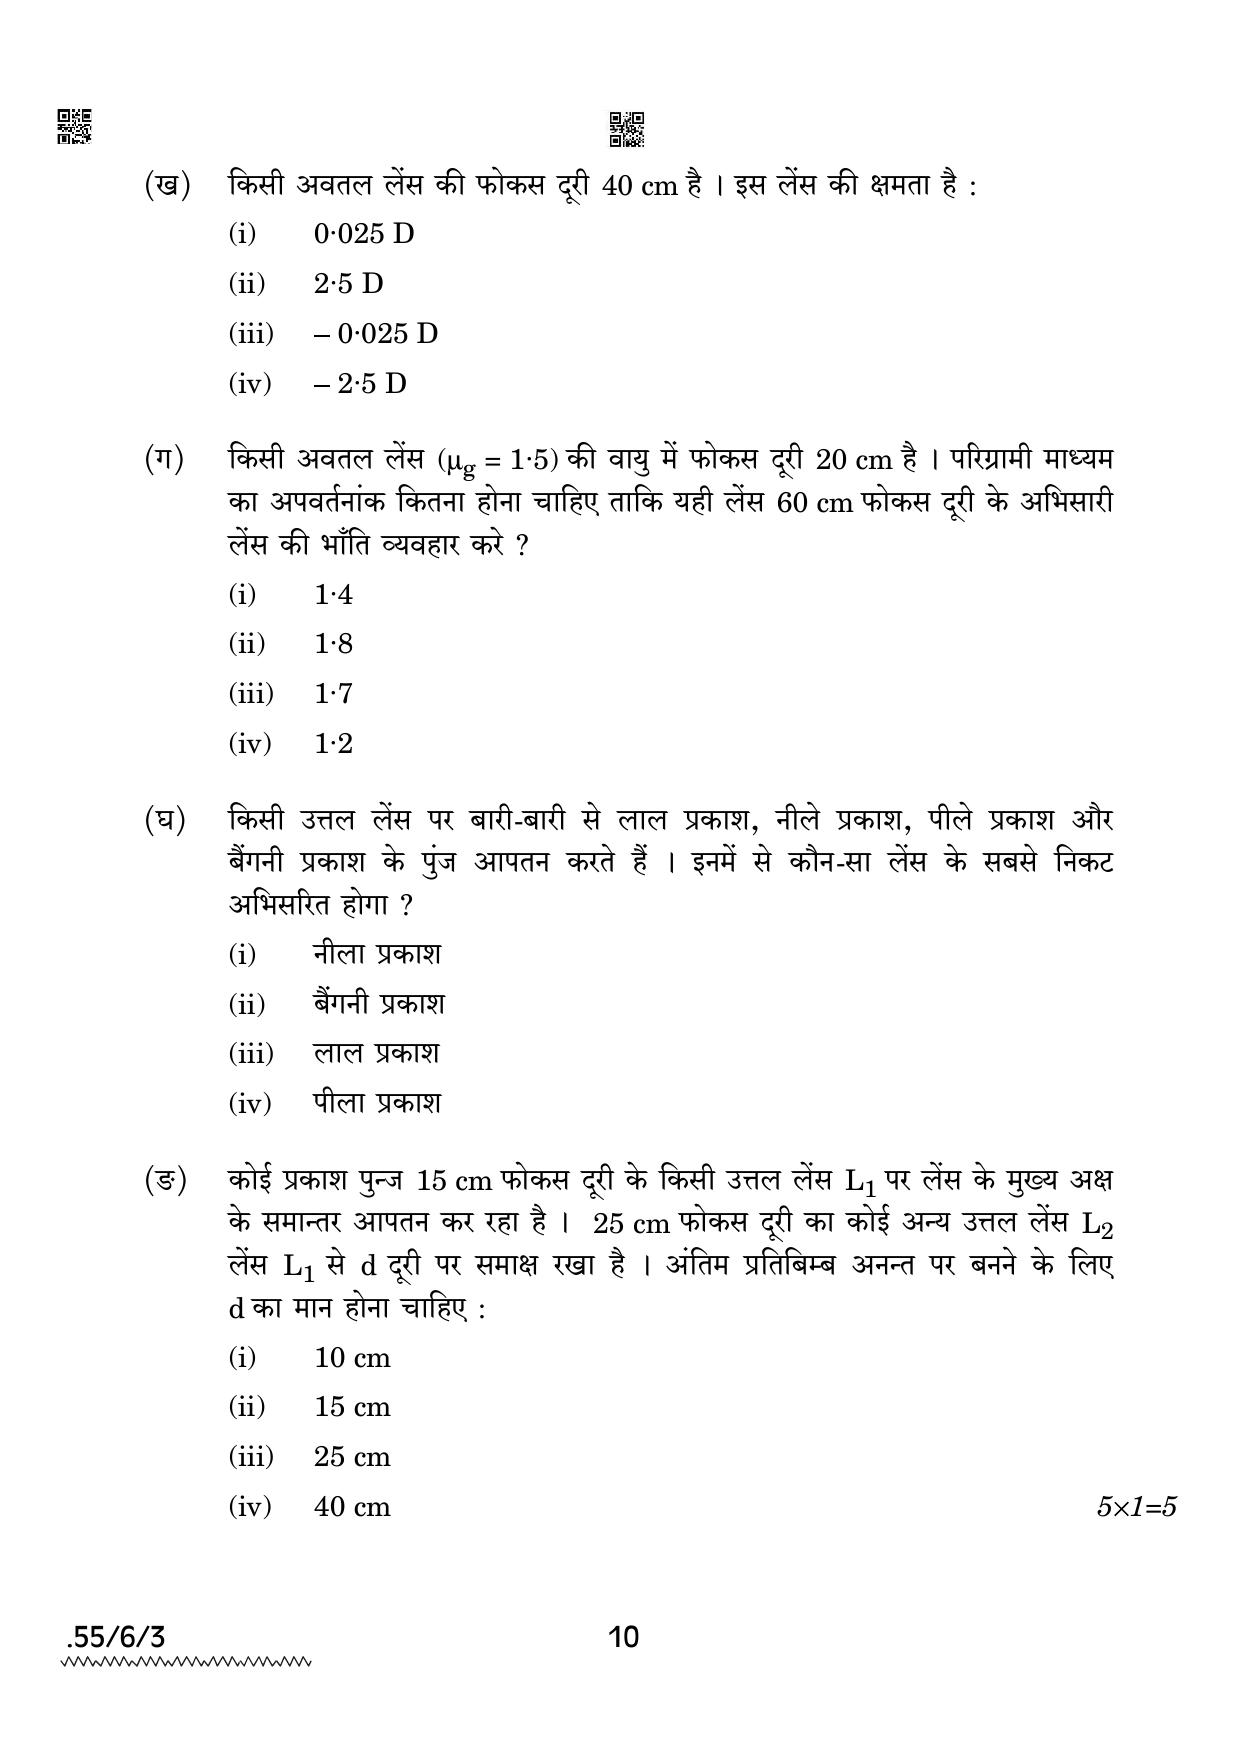 CBSE Class 12 55-6-3 PHYSICS 2022 Compartment Question Paper - Page 10